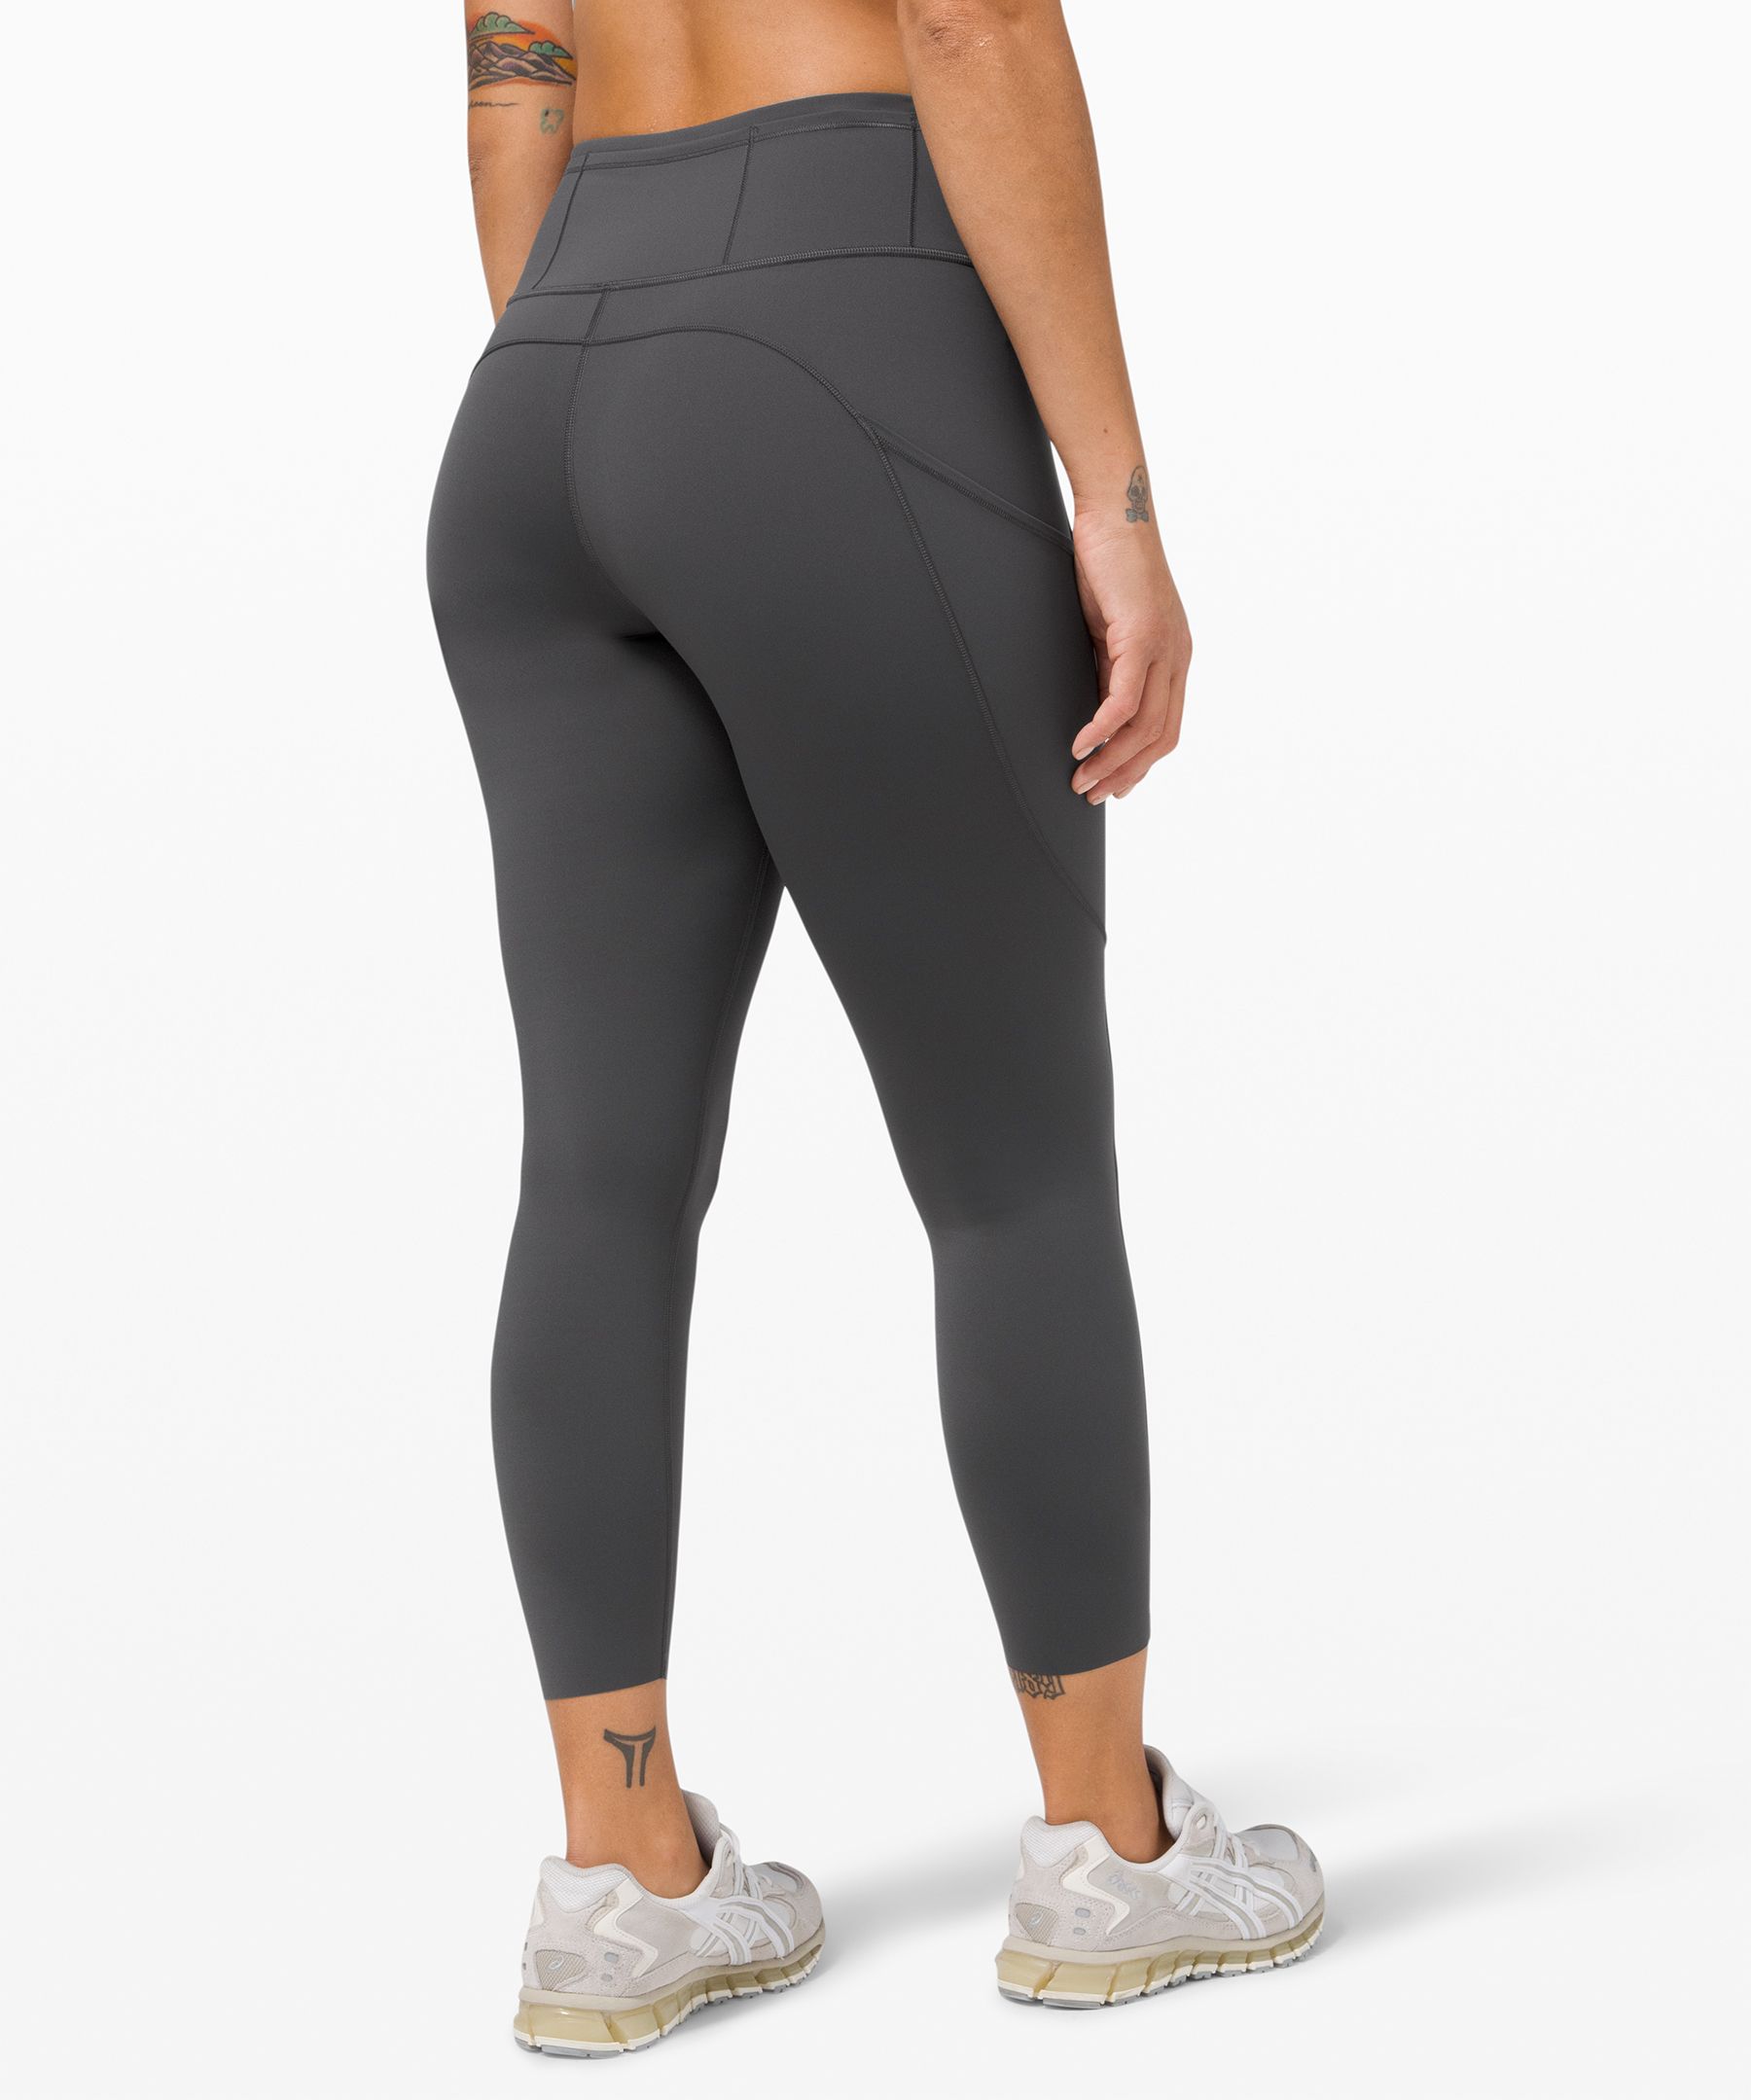 lululemon tights with side pockets